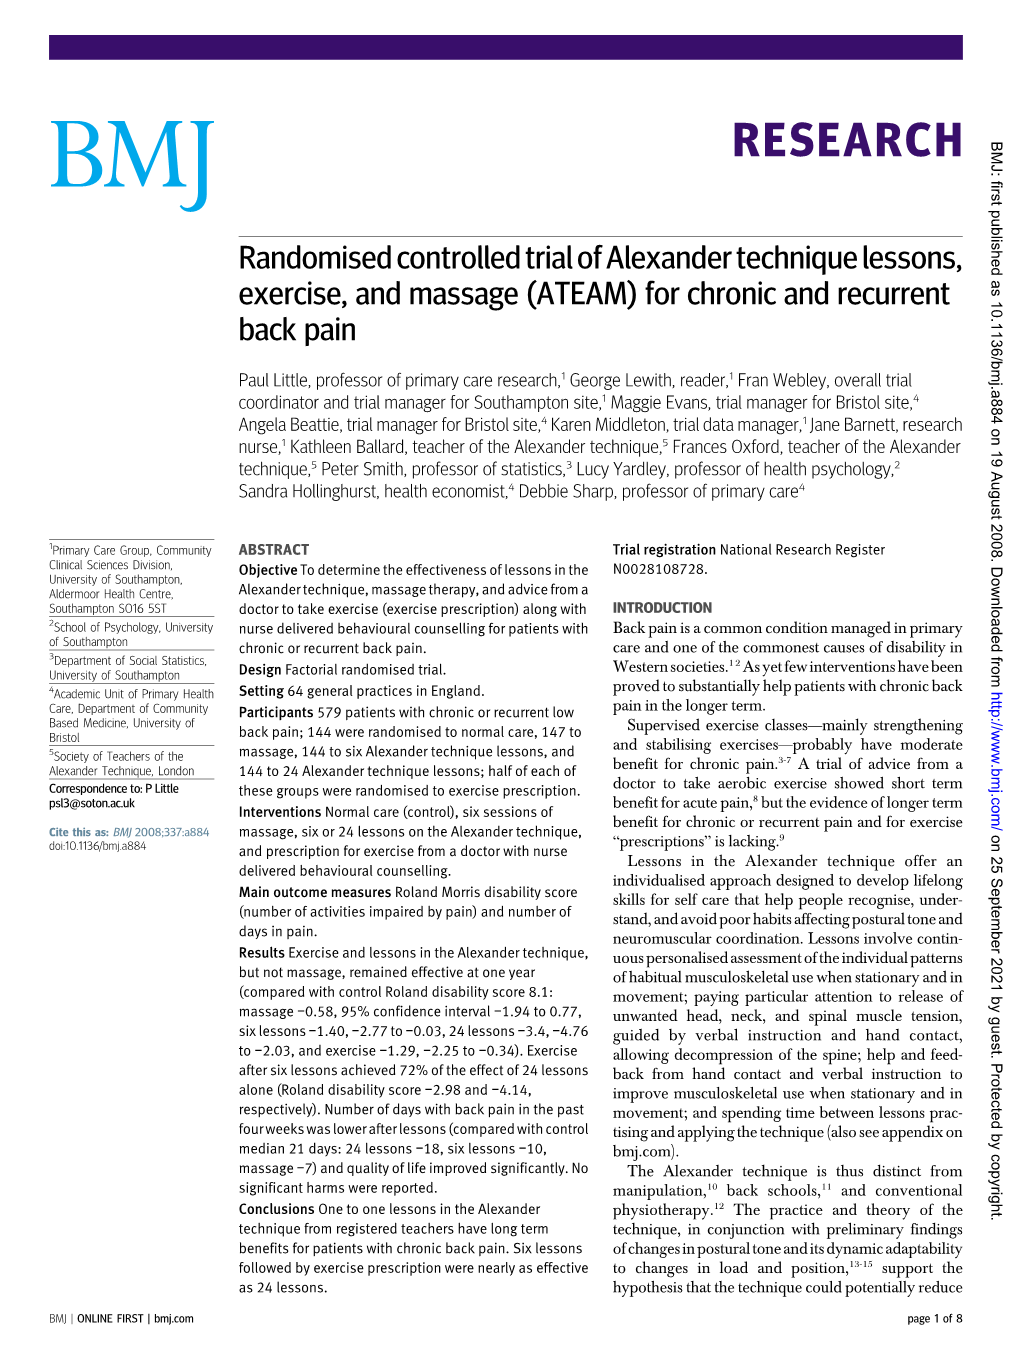 Randomised Controlled Trial of Alexander Technique Lessons, Exercise, and Massage (ATEAM) for Chronic and Recurrent Back Pain